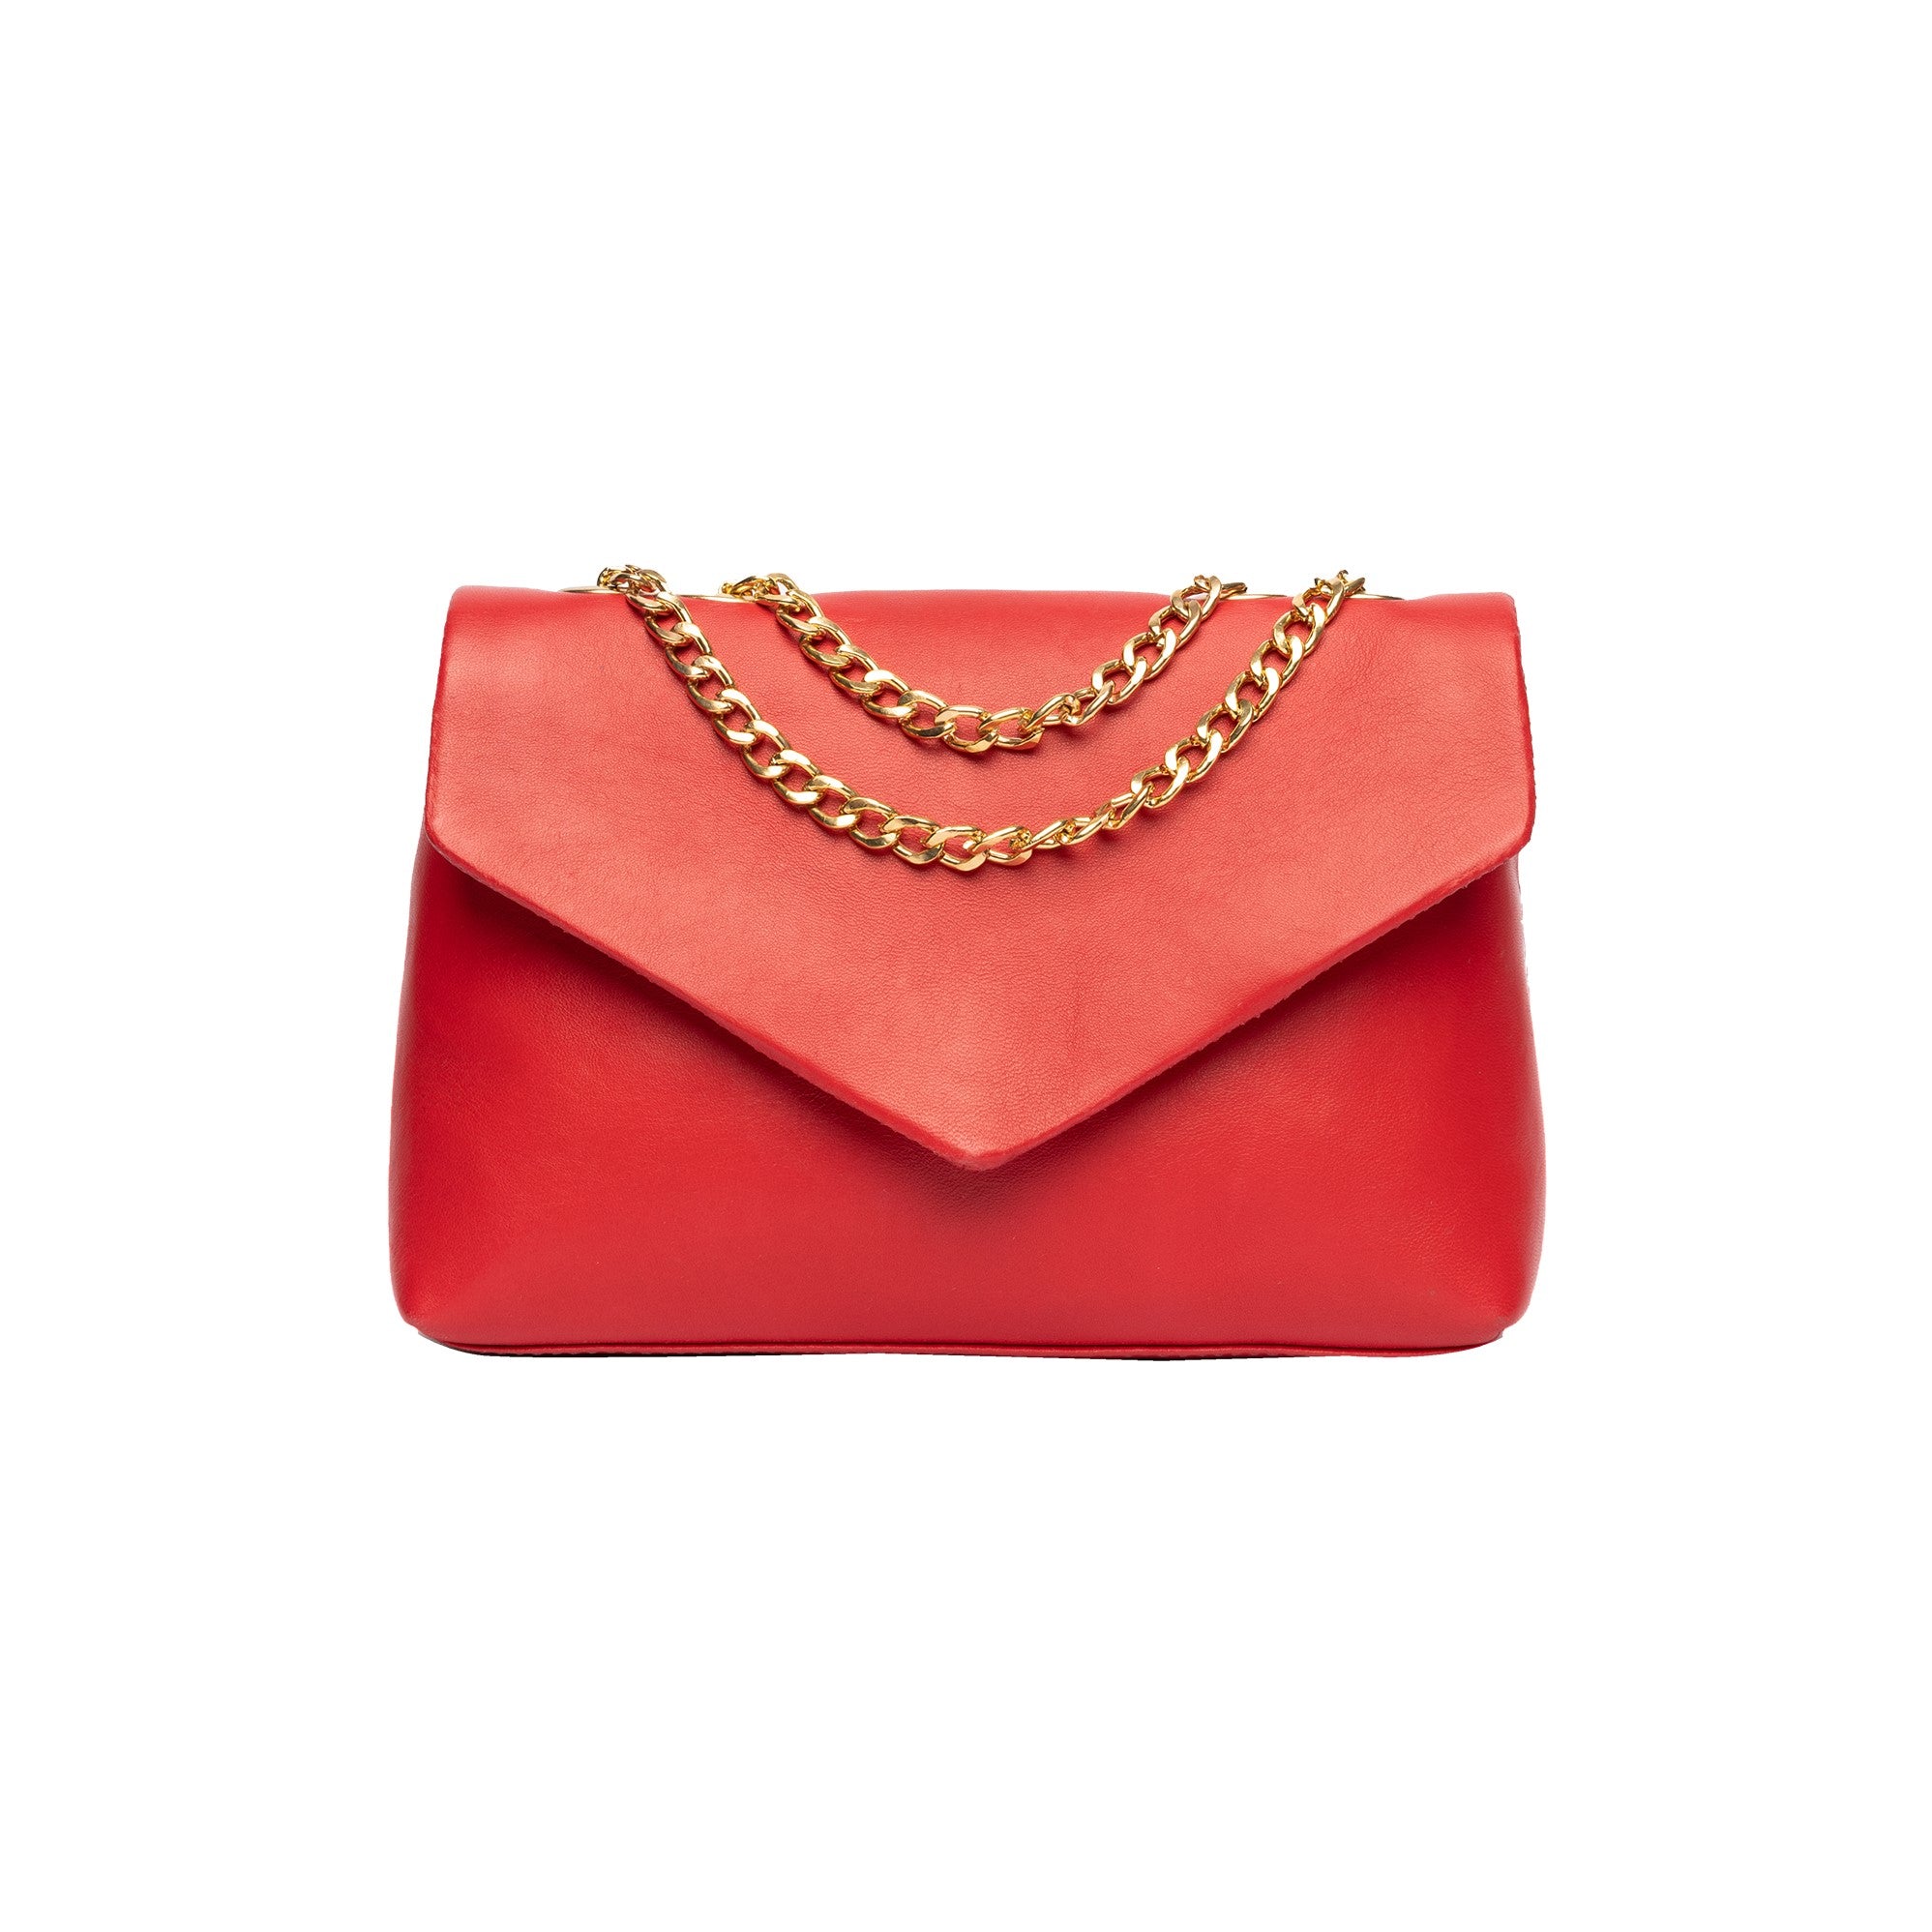 Estelle Small Bag Red